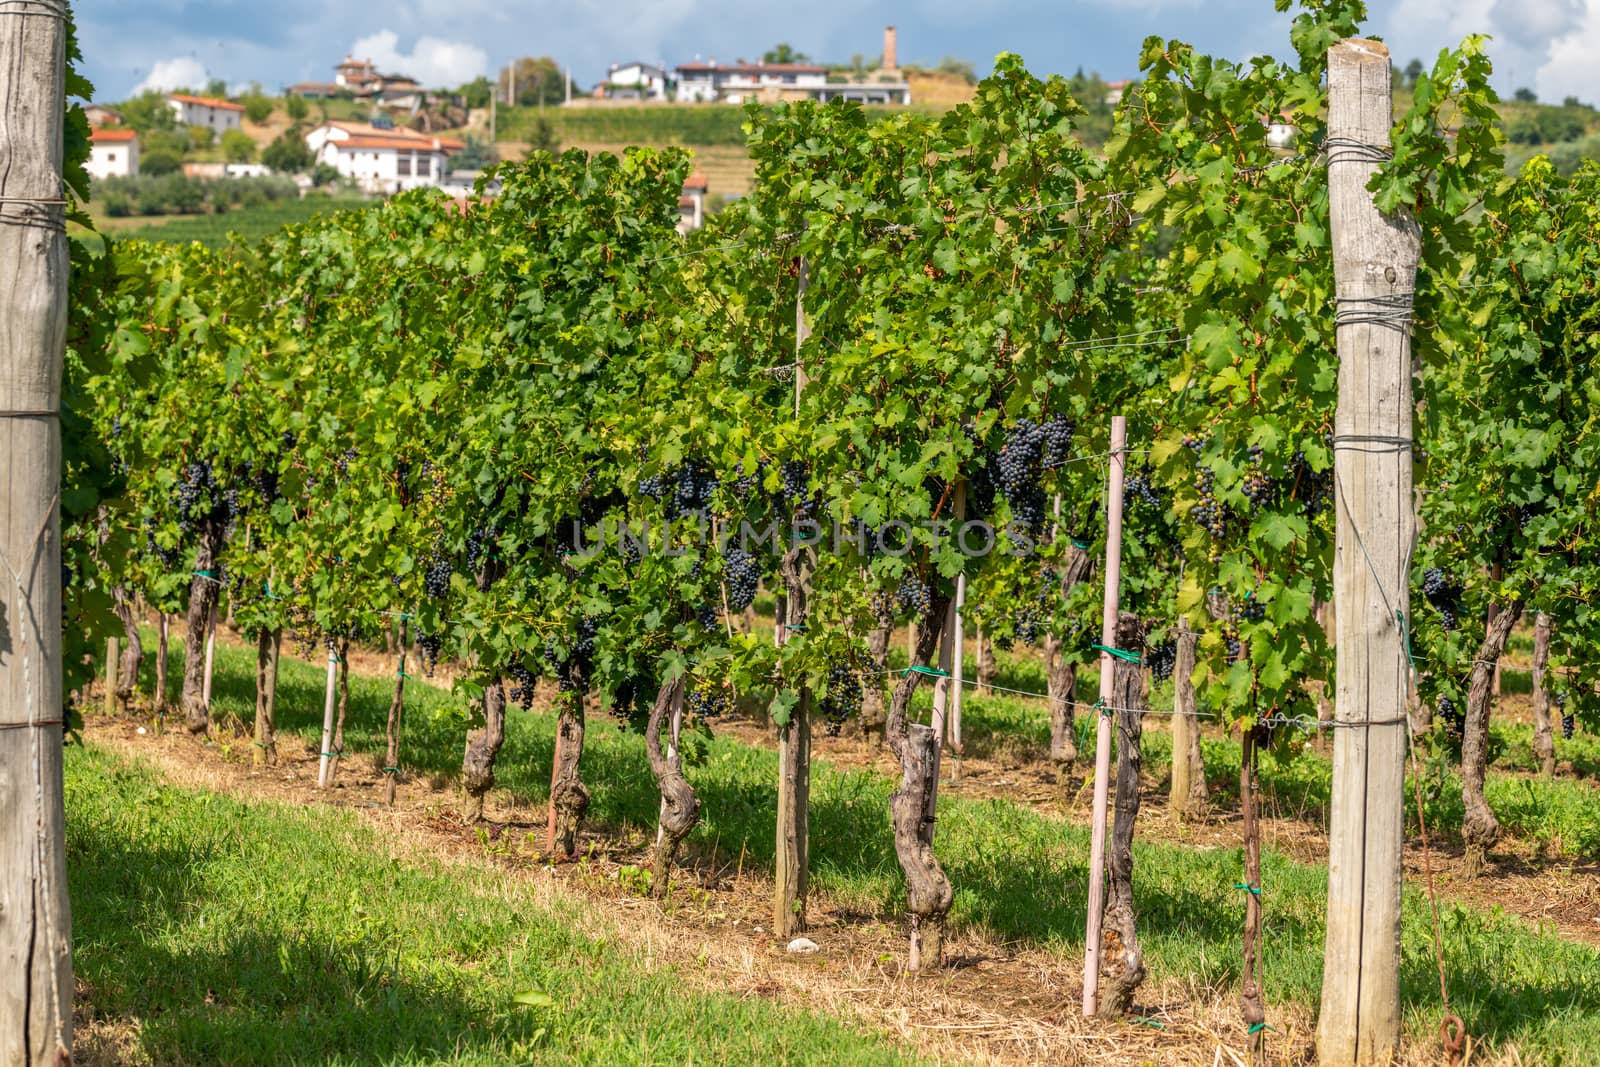 Vineyards with rows of grapevine in Gorska Brda, Slovenia, a famous wine groeing and producing region, becoming also a popular travel destination